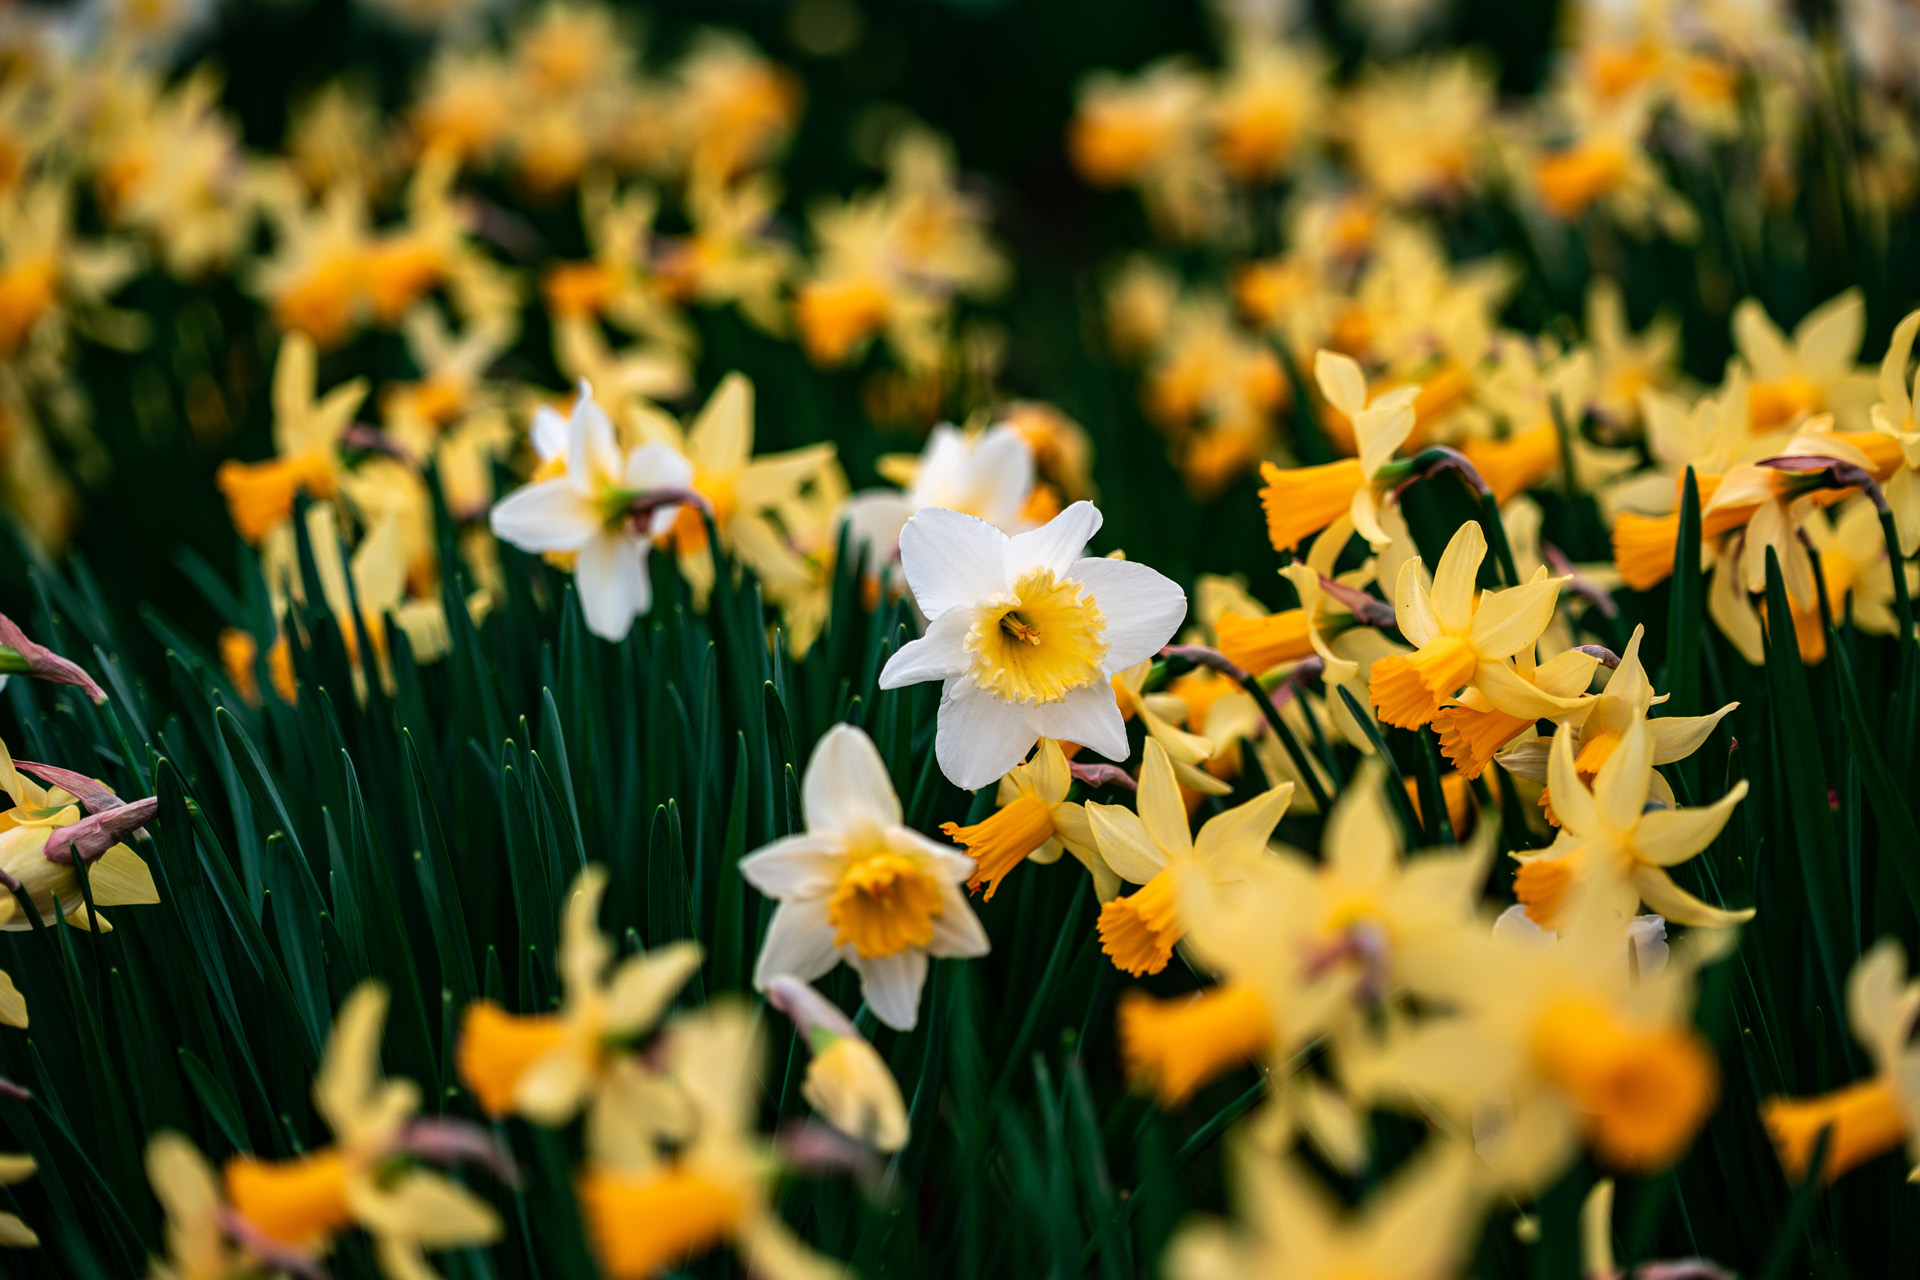 Adding daffodils to cattle feed could reduce methane emissions by a third